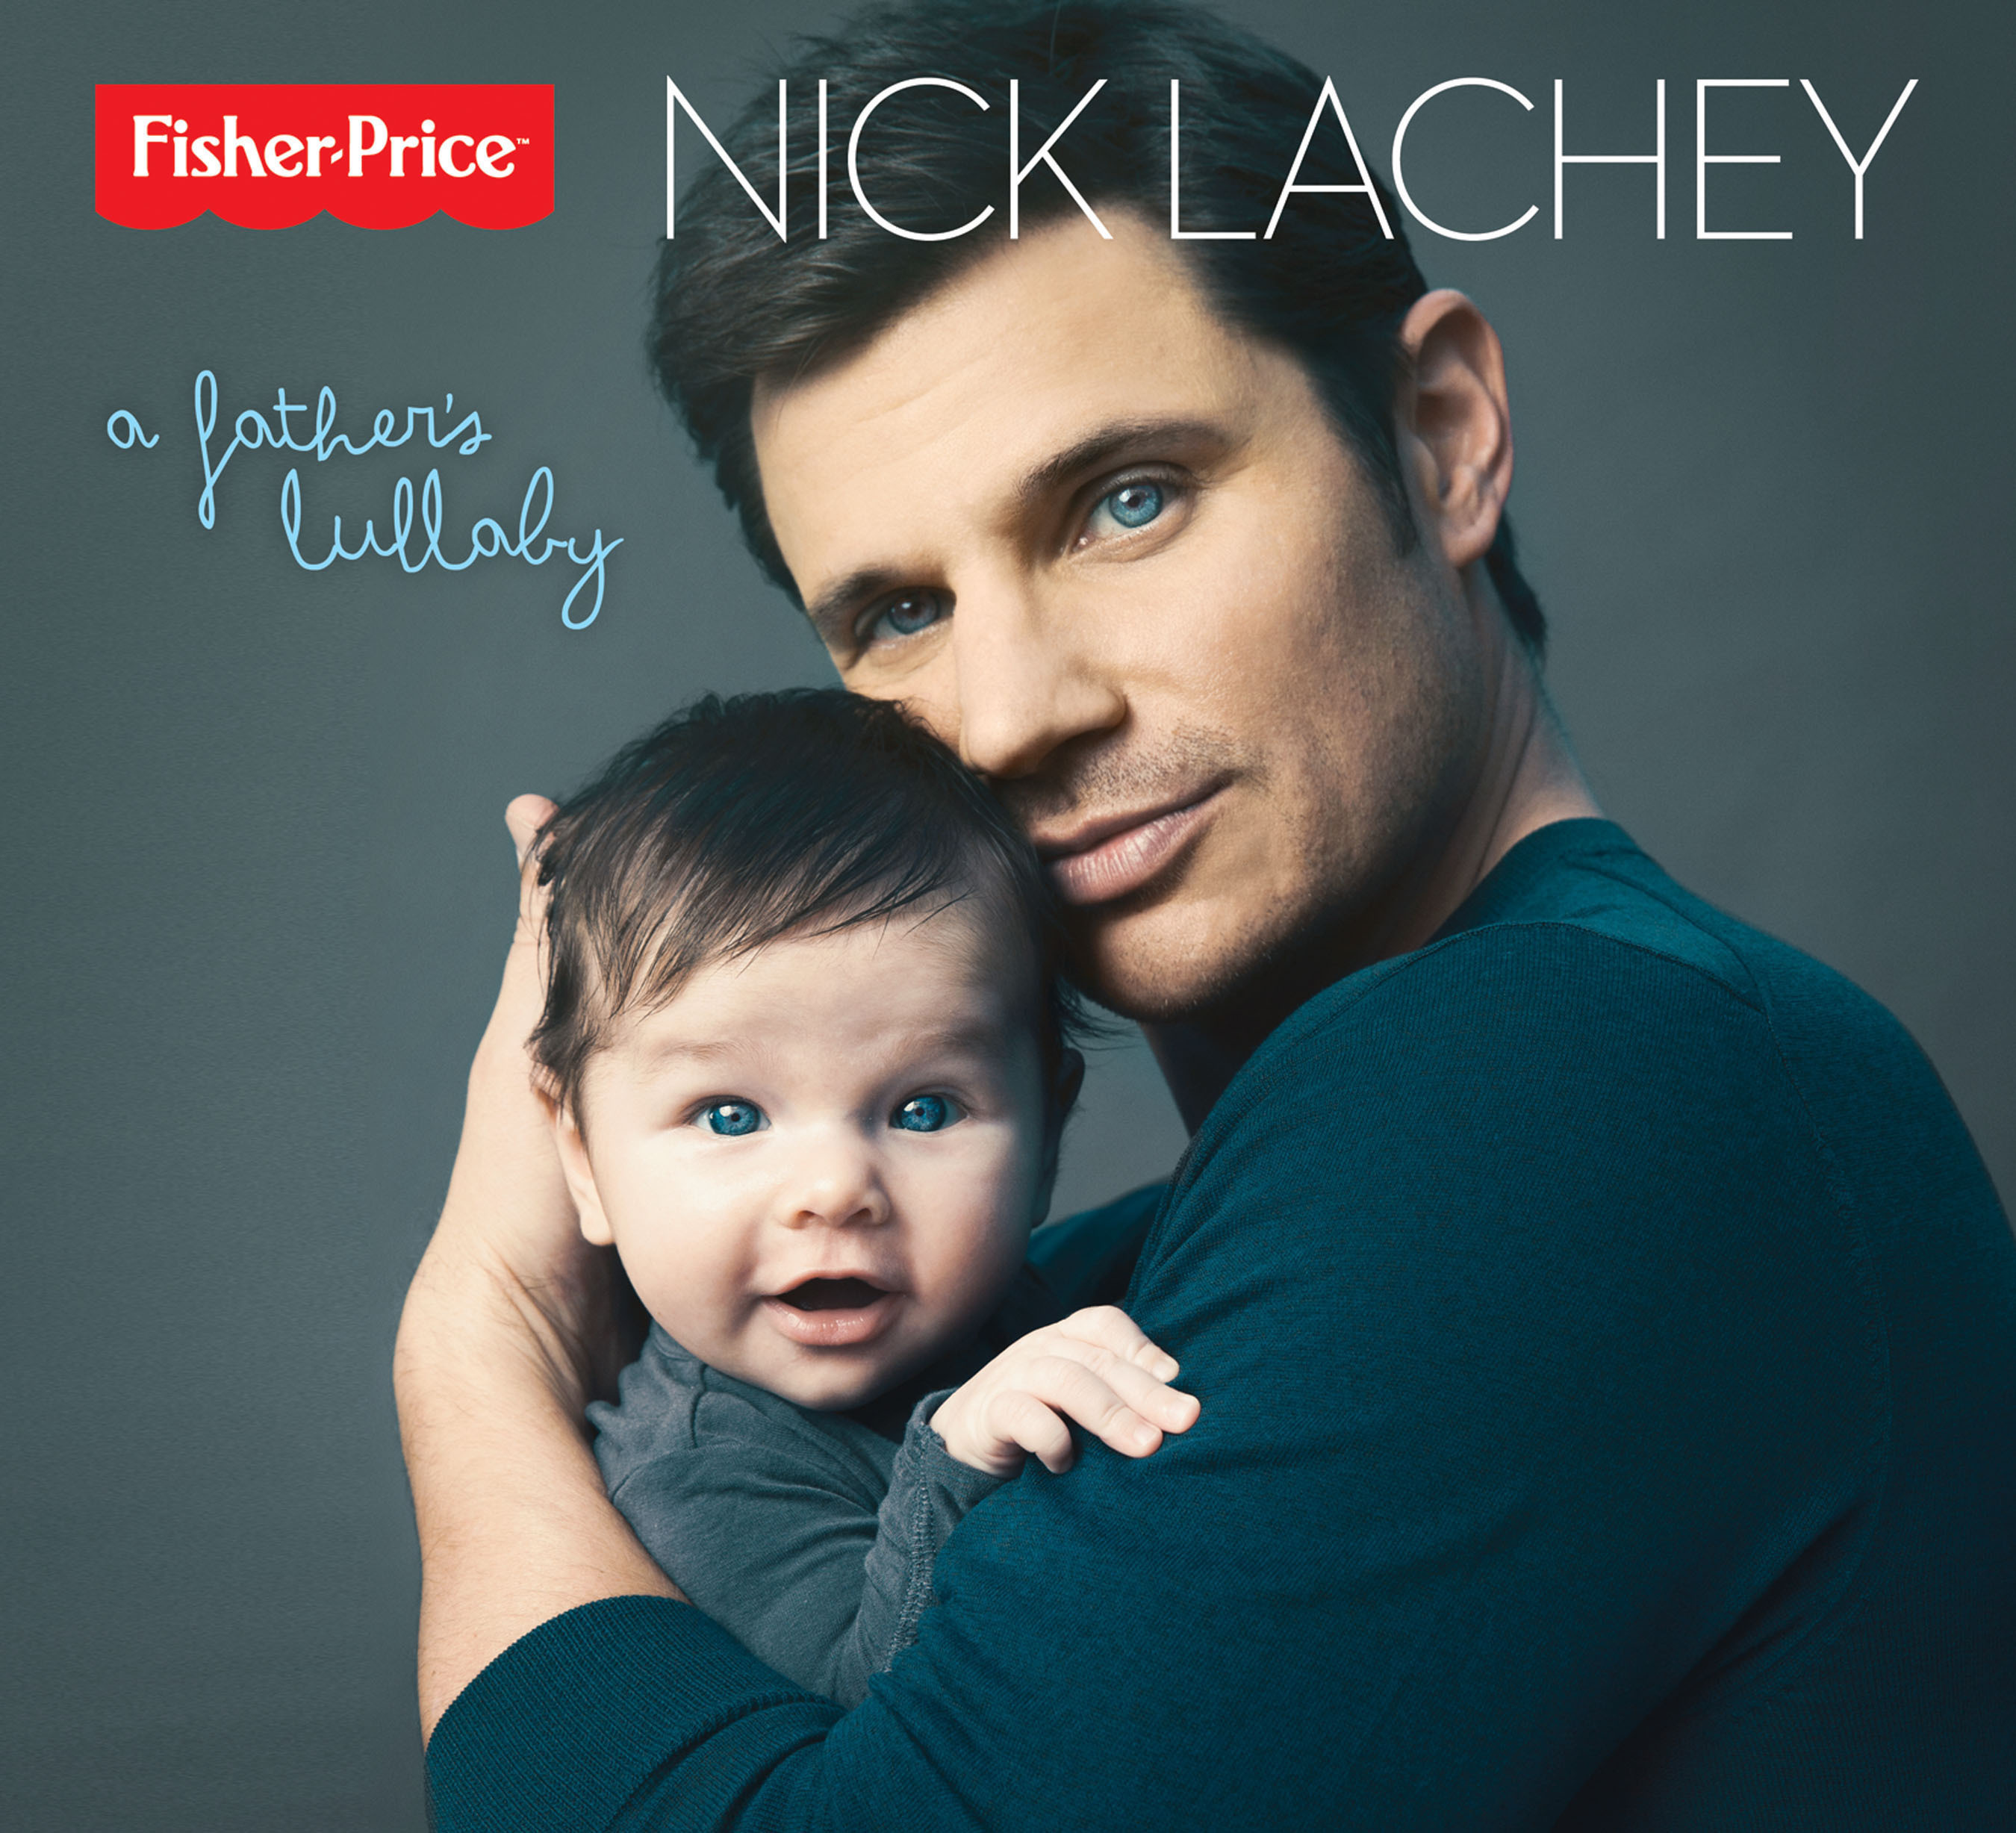 Nick Lachey's "A Father's Lullaby" available on iTunes and Amazon.com on March 13th. (PRNewsFoto/Fisher-Price) (PRNewsFoto/FISHER-PRICE)